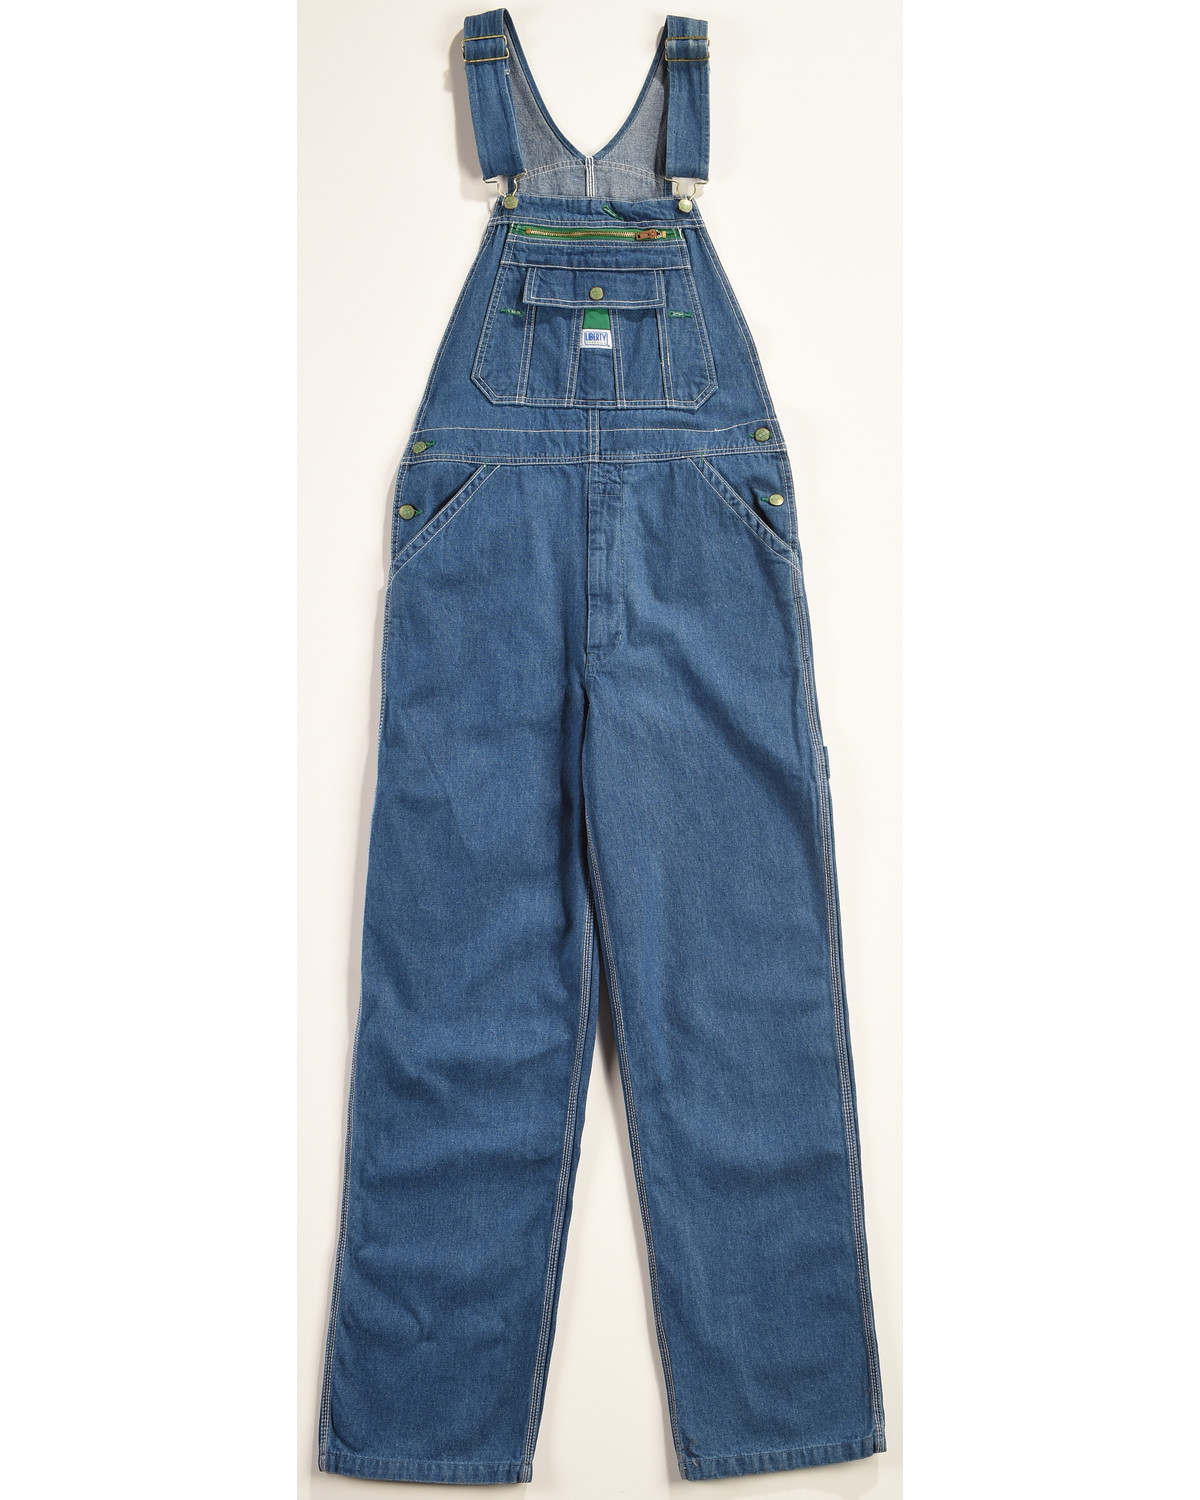 Liberty Men's Stonewashed Denim Bib Overalls - Country Outfitter